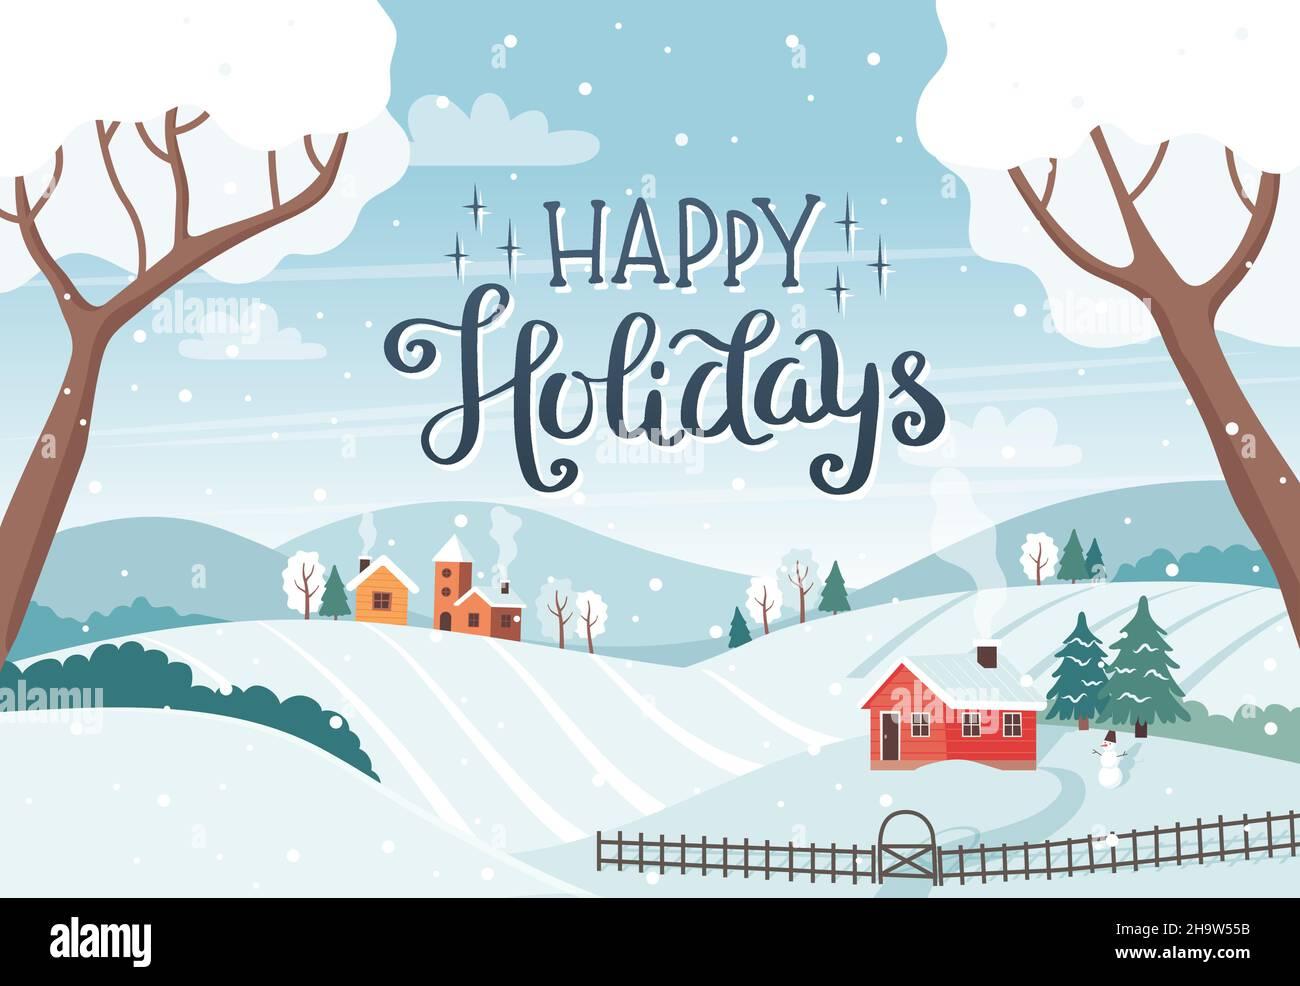 Free download Happy holidays card Winter landscape with trees fields ...